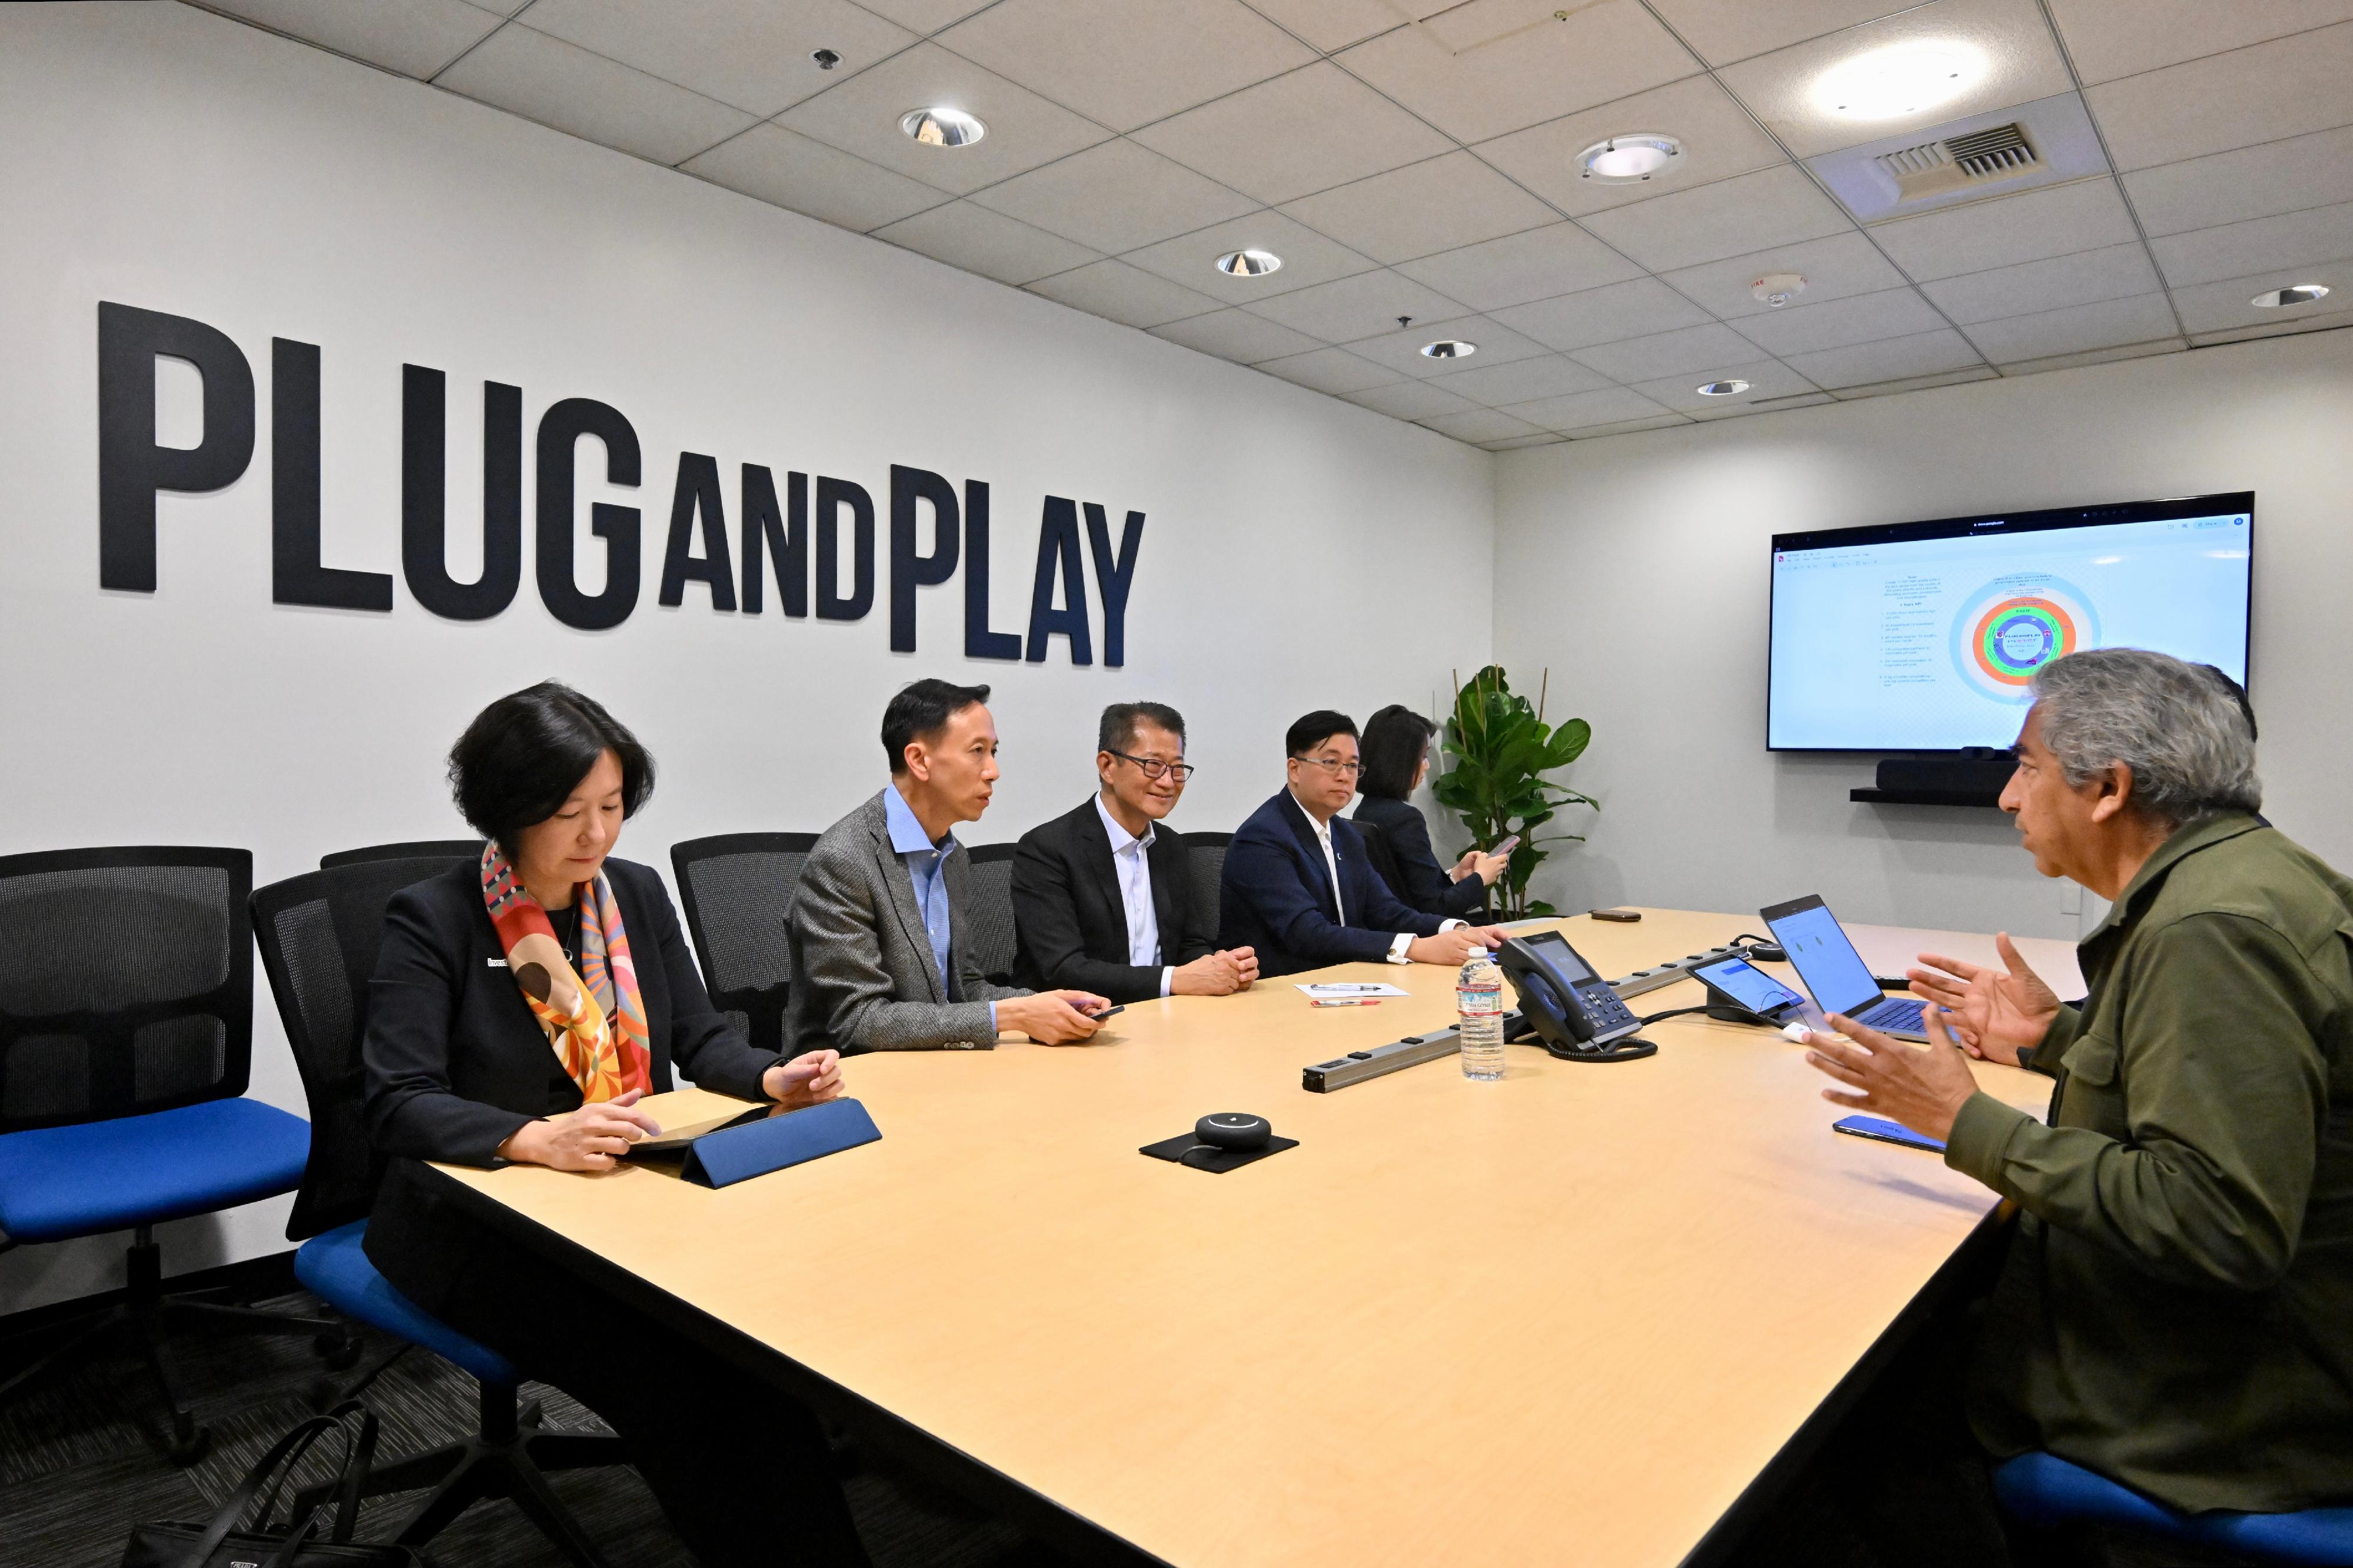 The Financial Secretary, Mr Paul Chan, began his visit to the United States on May 28 (San Francisco time), and visited a Silicon Valley startup accelerator, Plug and Play. Photo shows Mr Chan (third left) meeting with one of the founders of Plug and Play, Mr Rahim Amidi (first right).